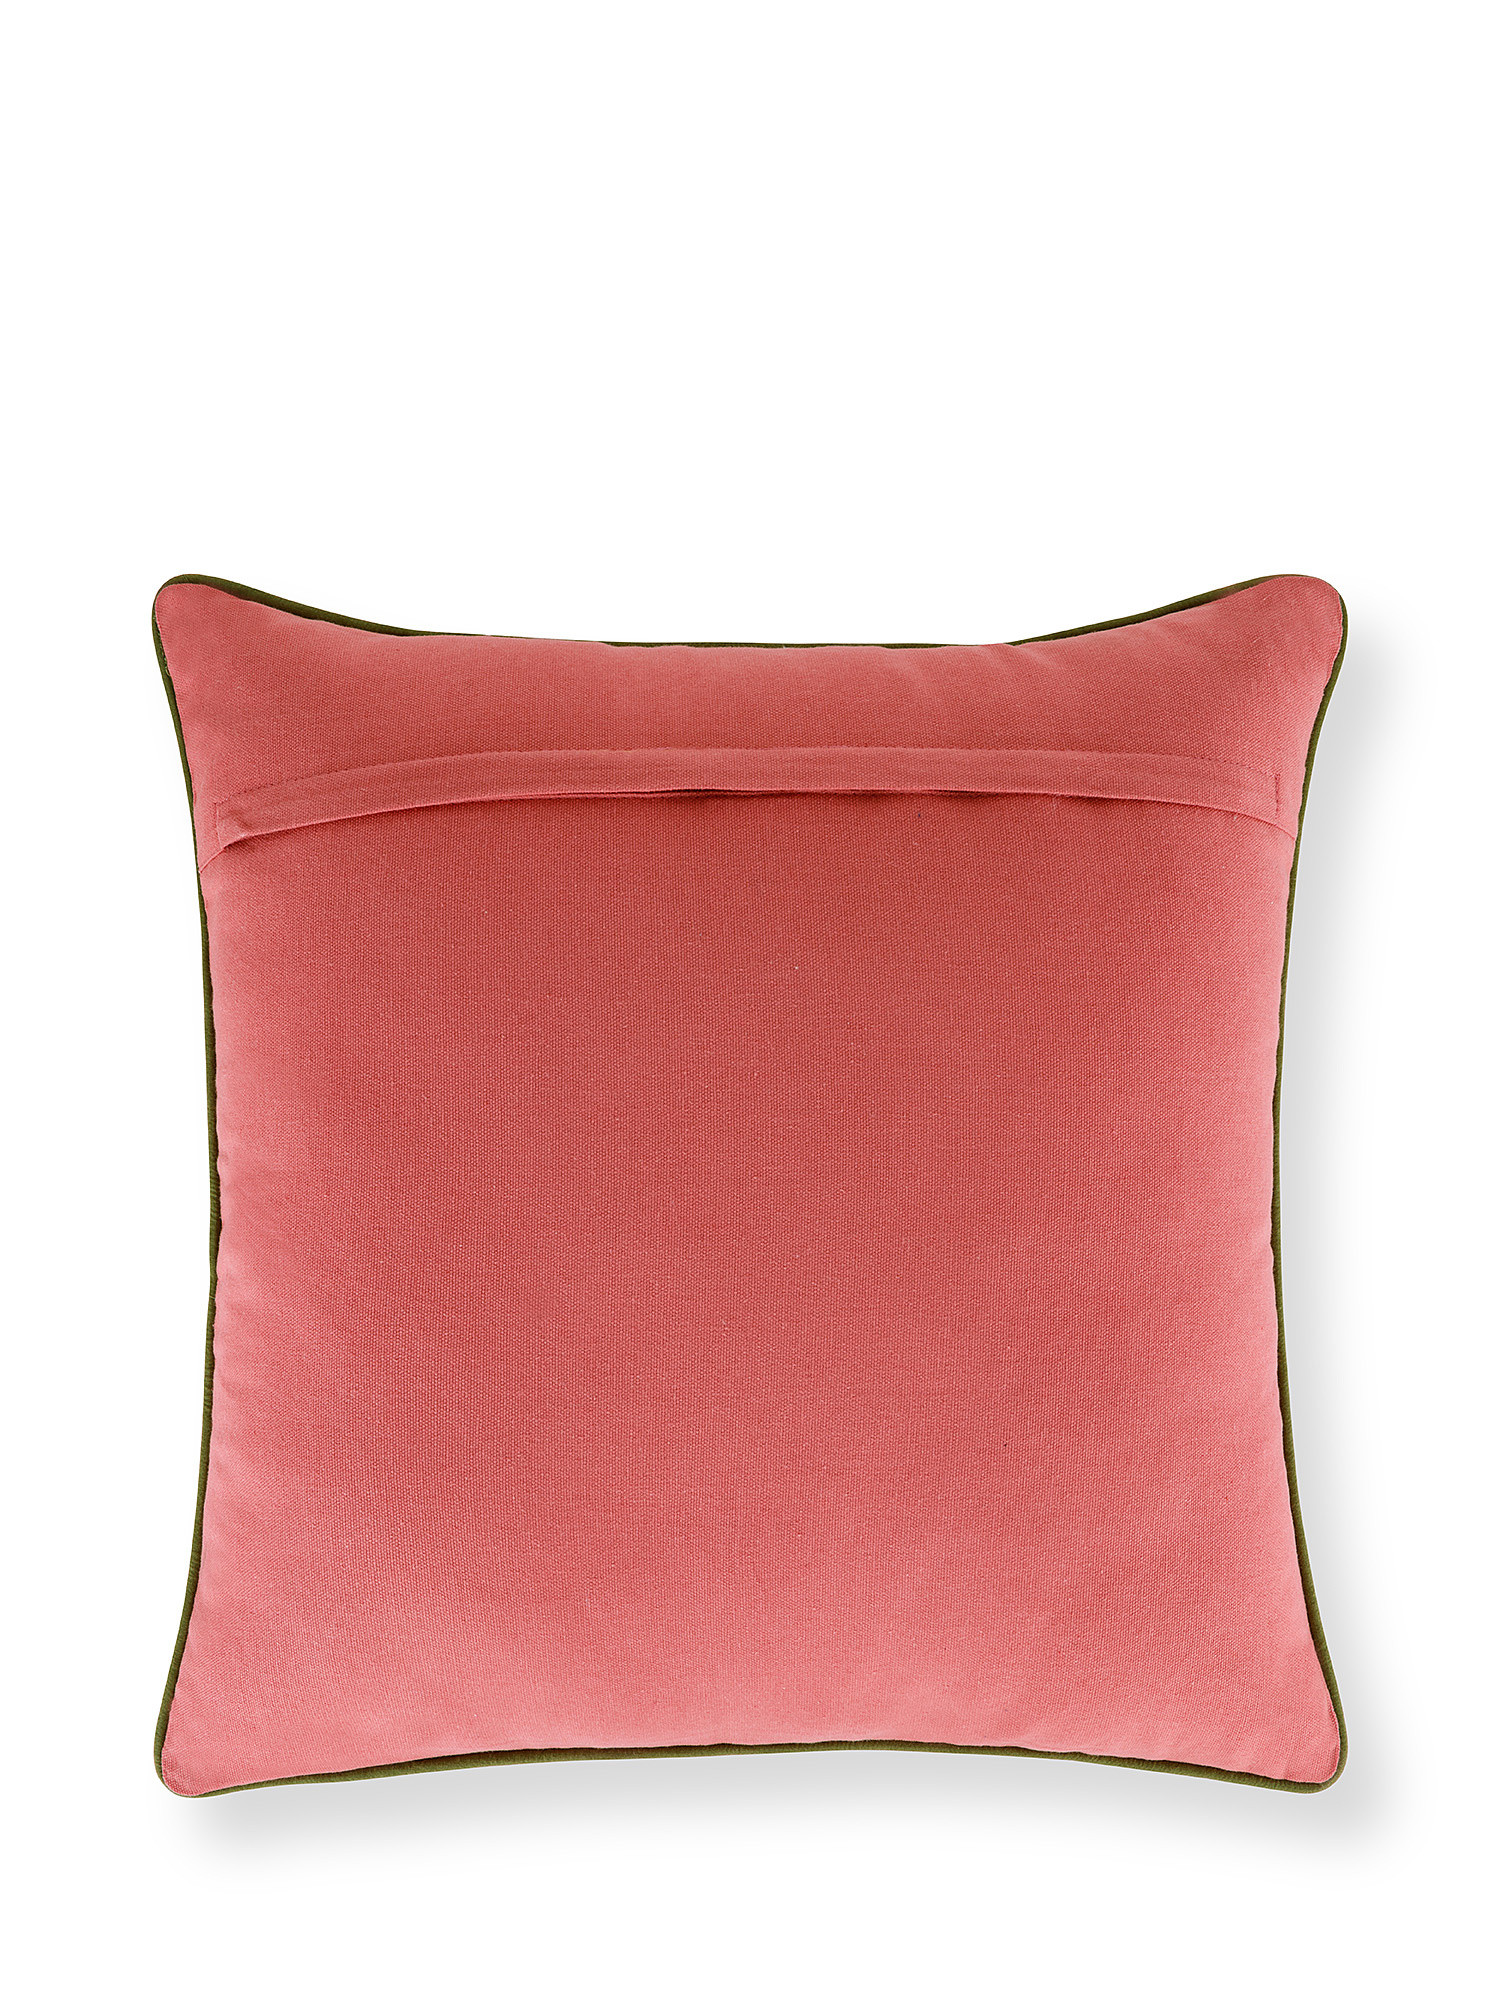 Flower embroidery cushion 45x45cm, Pink, large image number 1